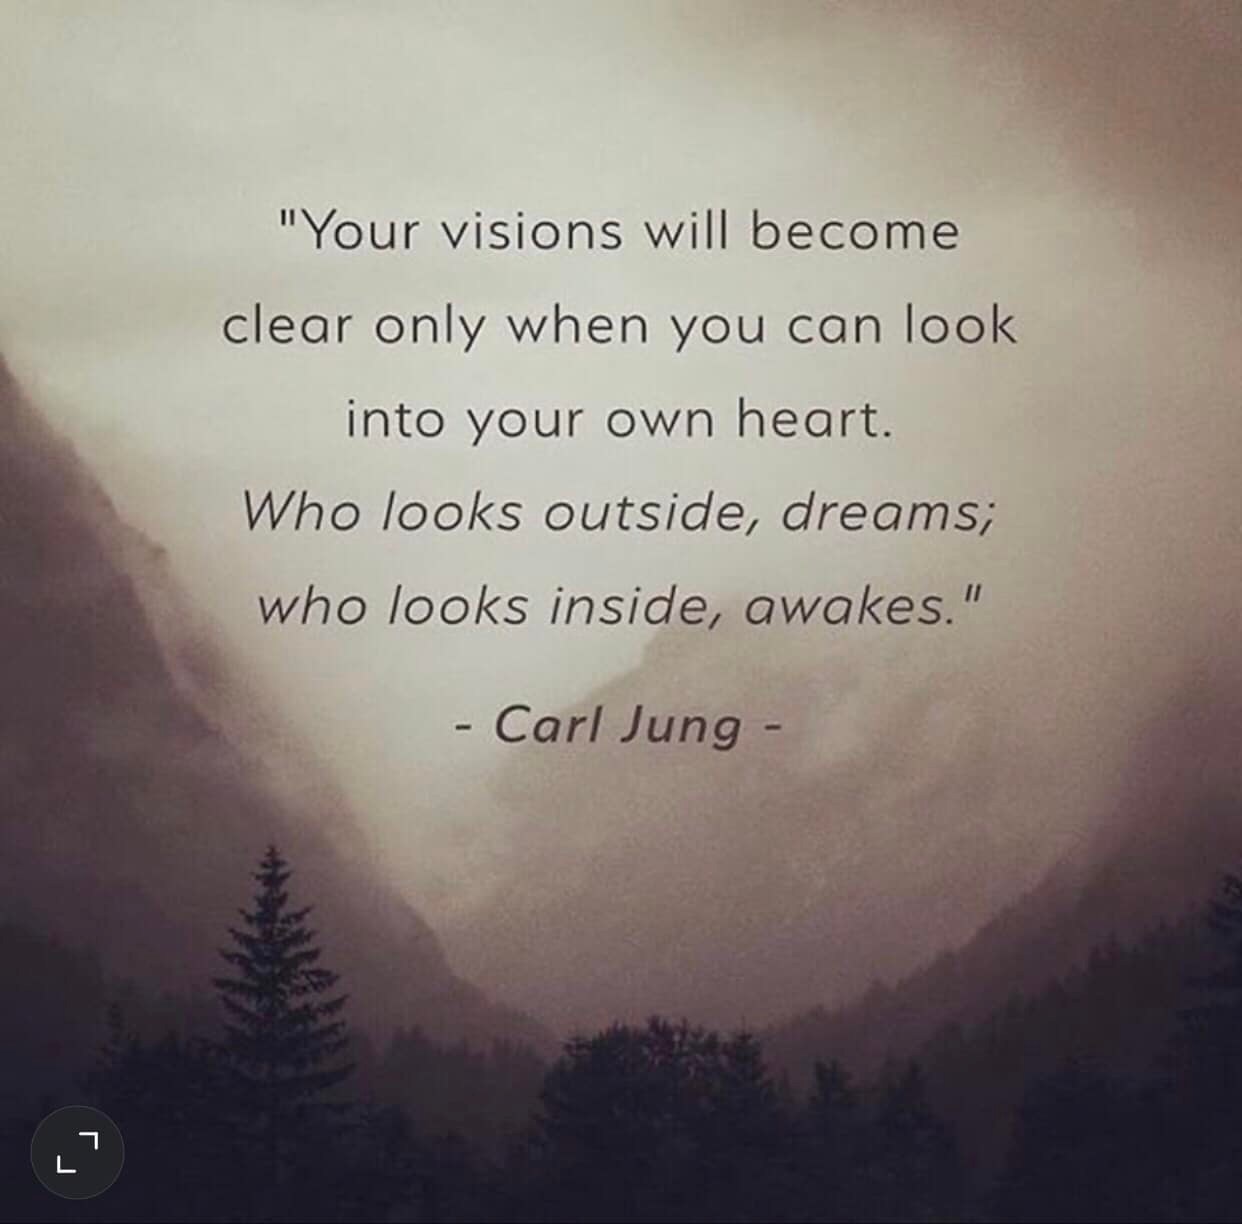 Your vision will become clear only when you look into your heart. Who looks outside, dreams. Who looks inside awakens.